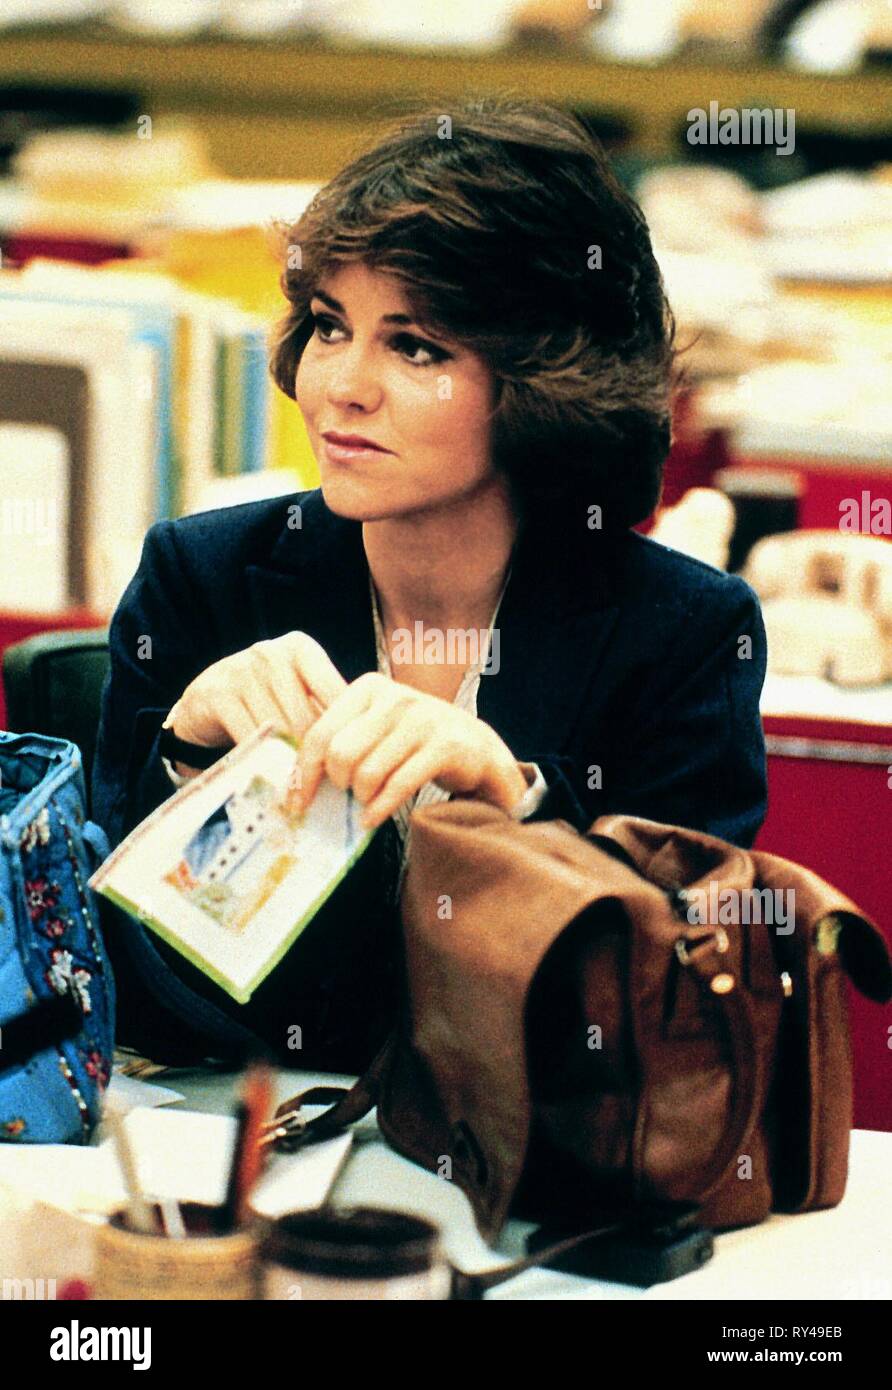 SALLY FIELD, l'absence de malice, 1981 Banque D'Images